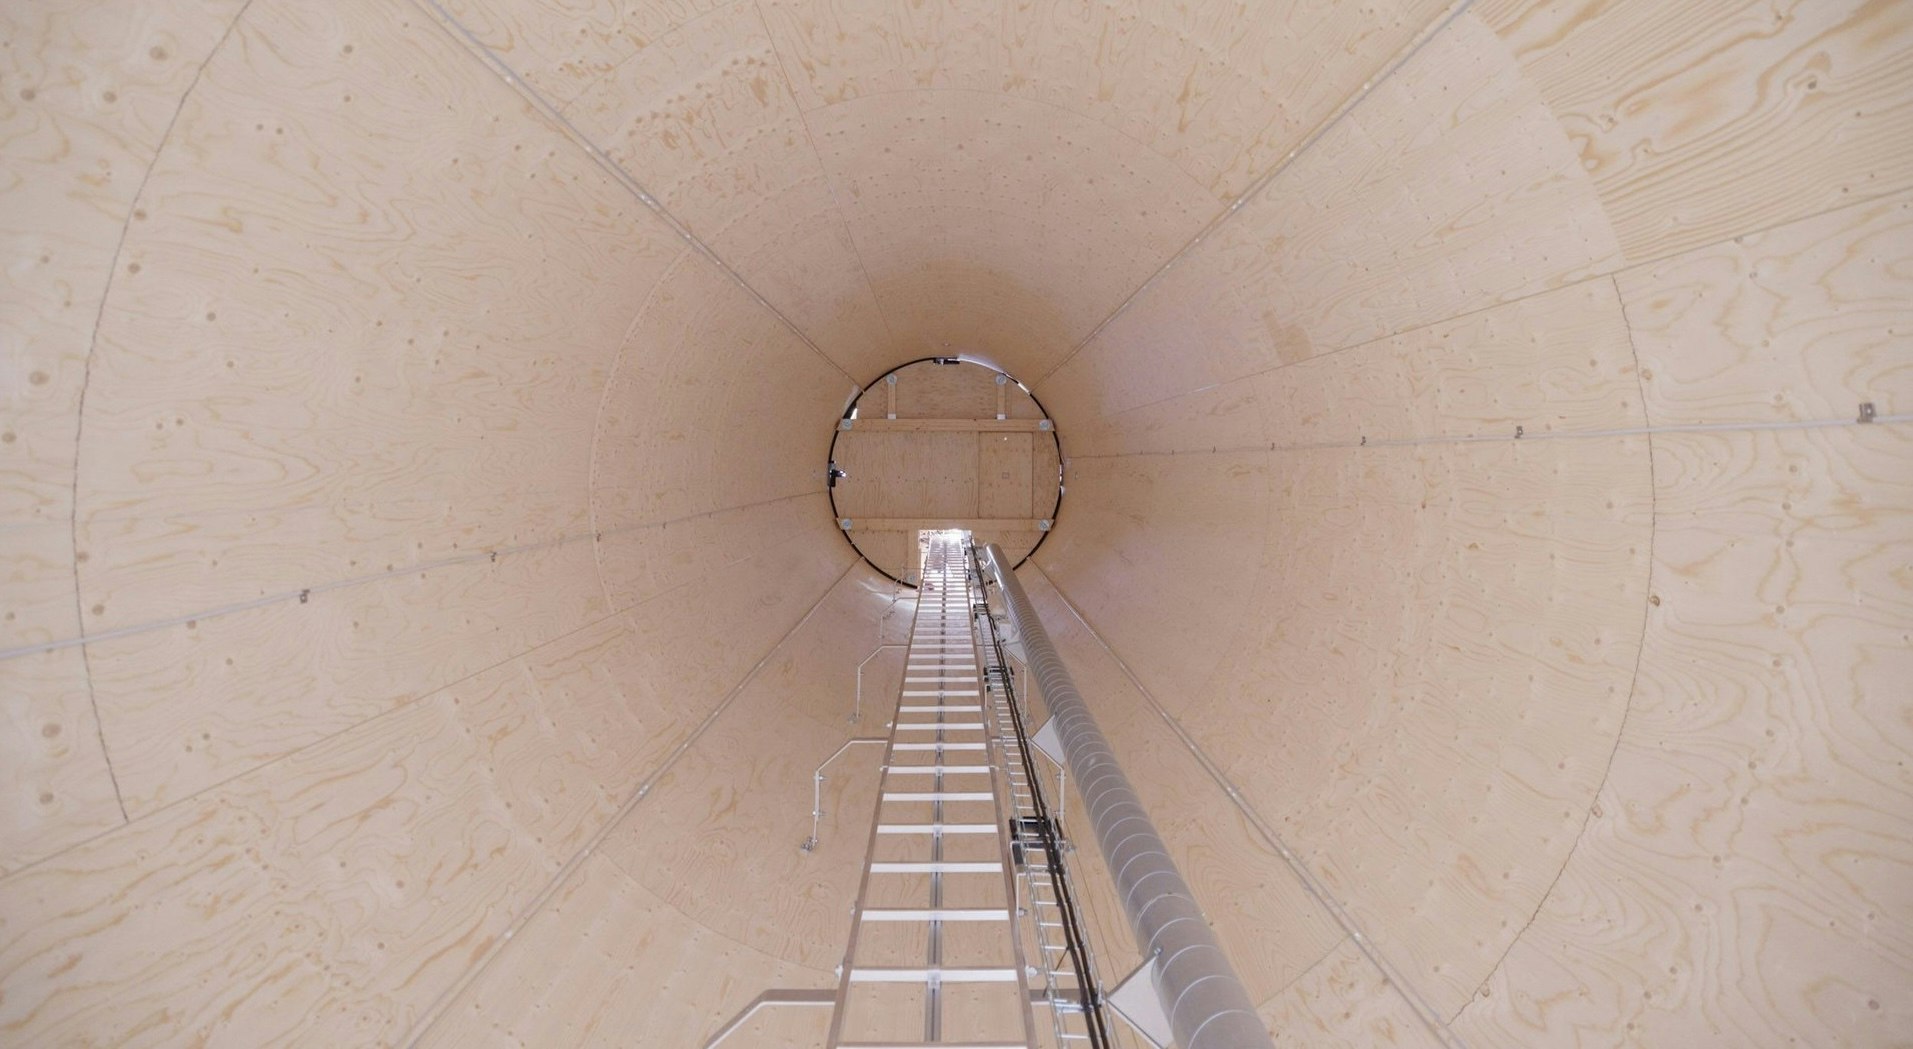 Picture of the inside of Modvion's wooden wind power tower